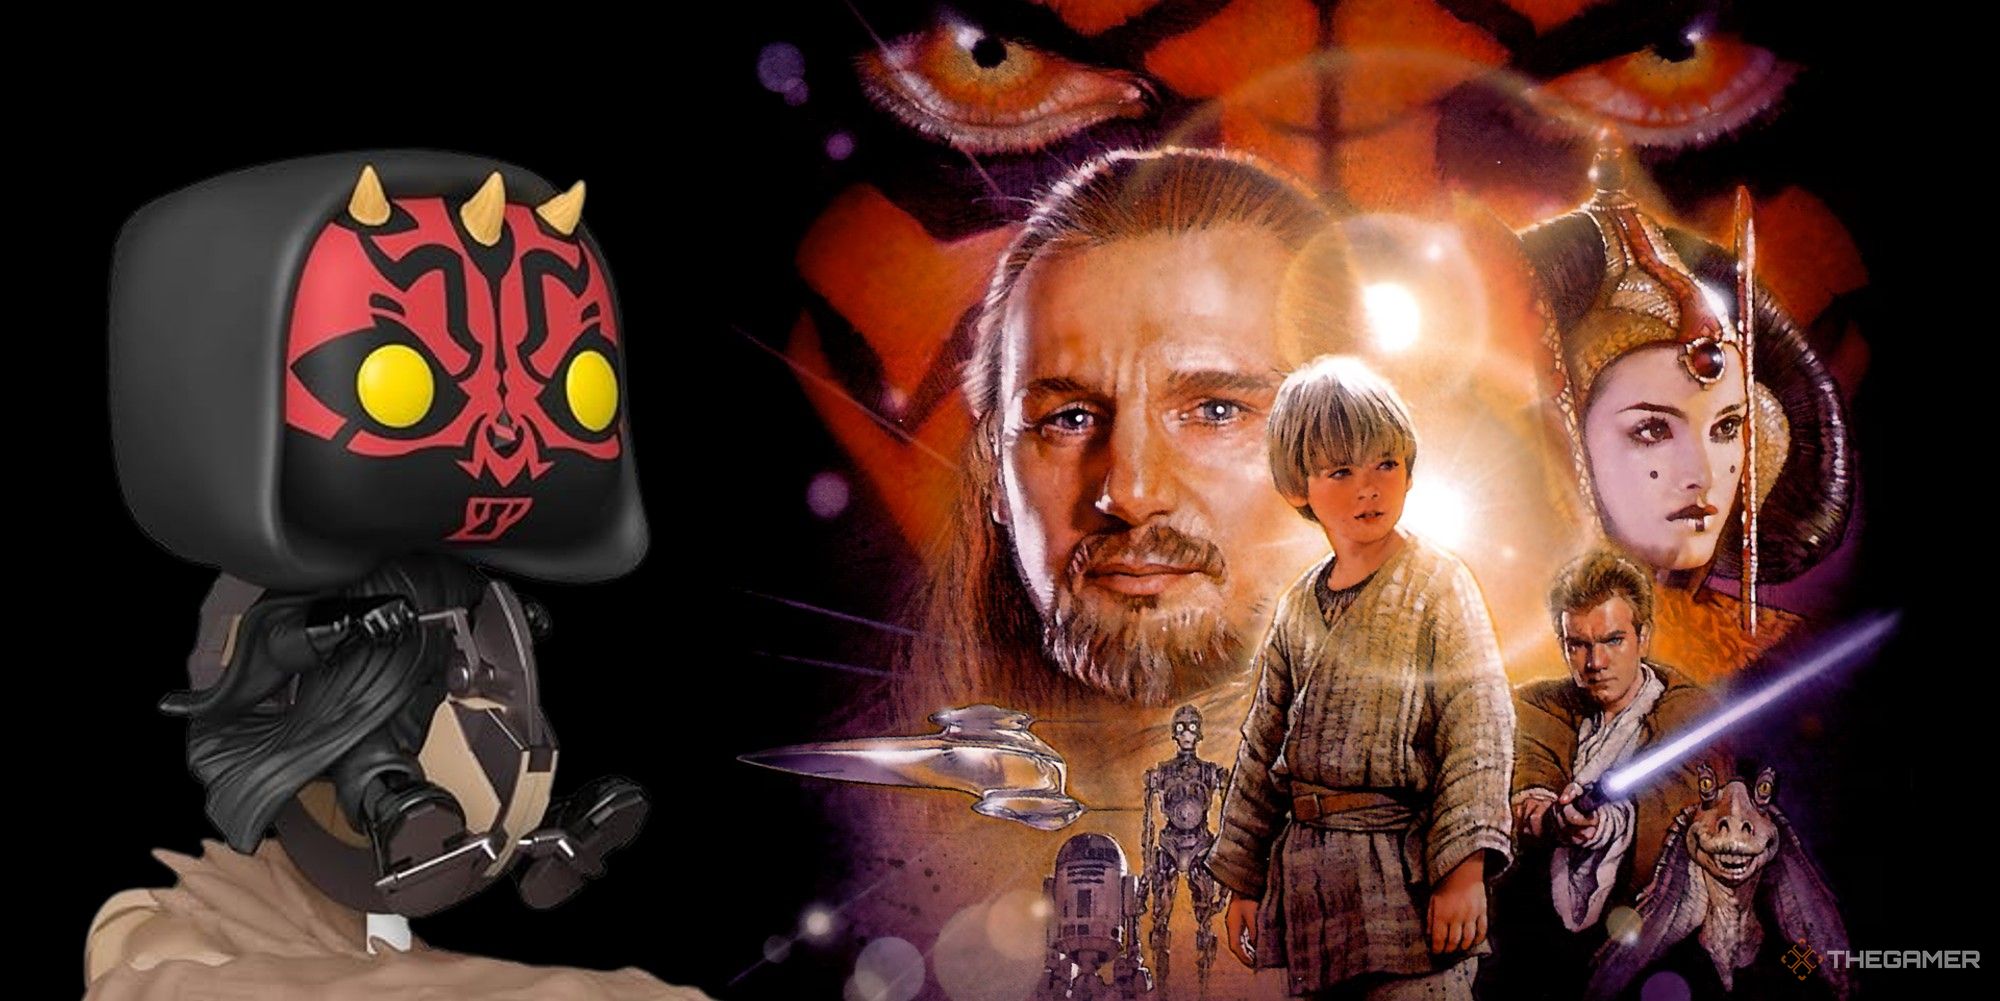 darth maul on a palafin racer funko pop next to the phantom menace poster